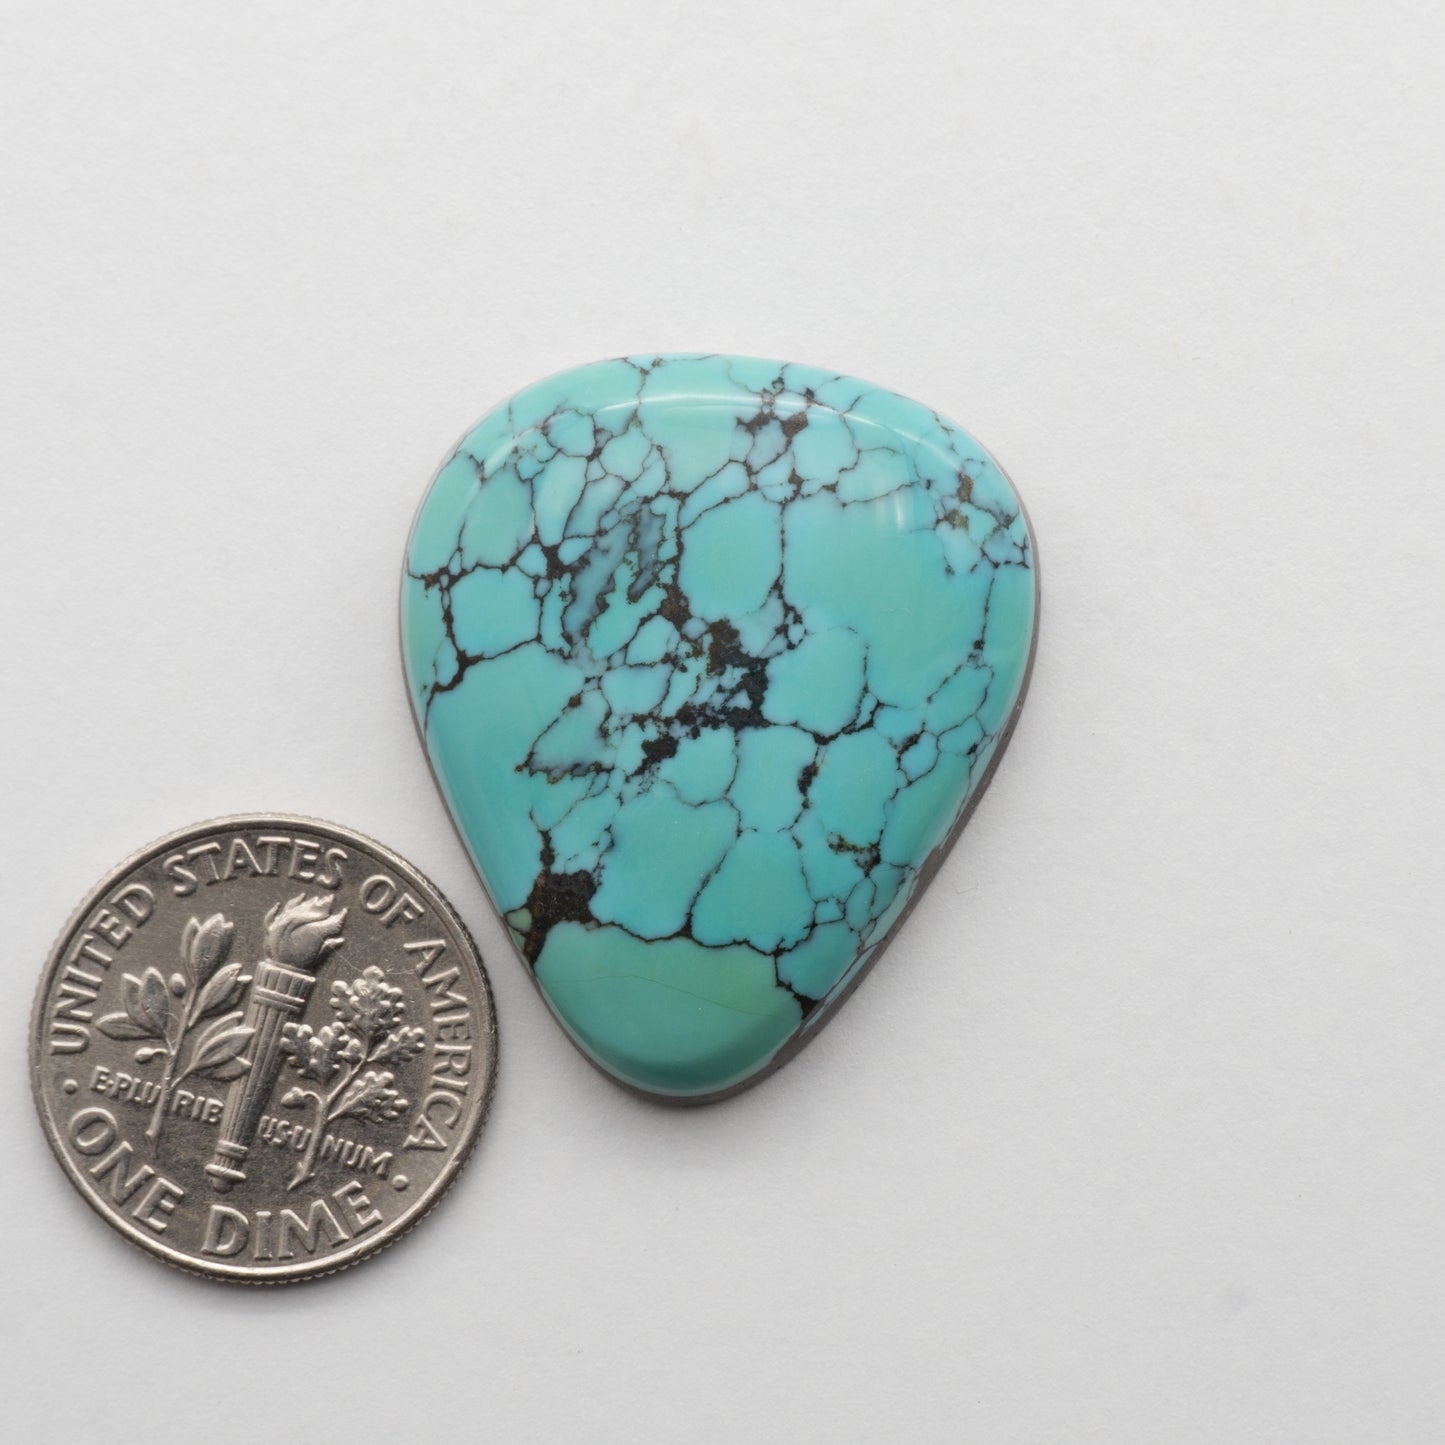 Blue Moon Turquoise Cabochon